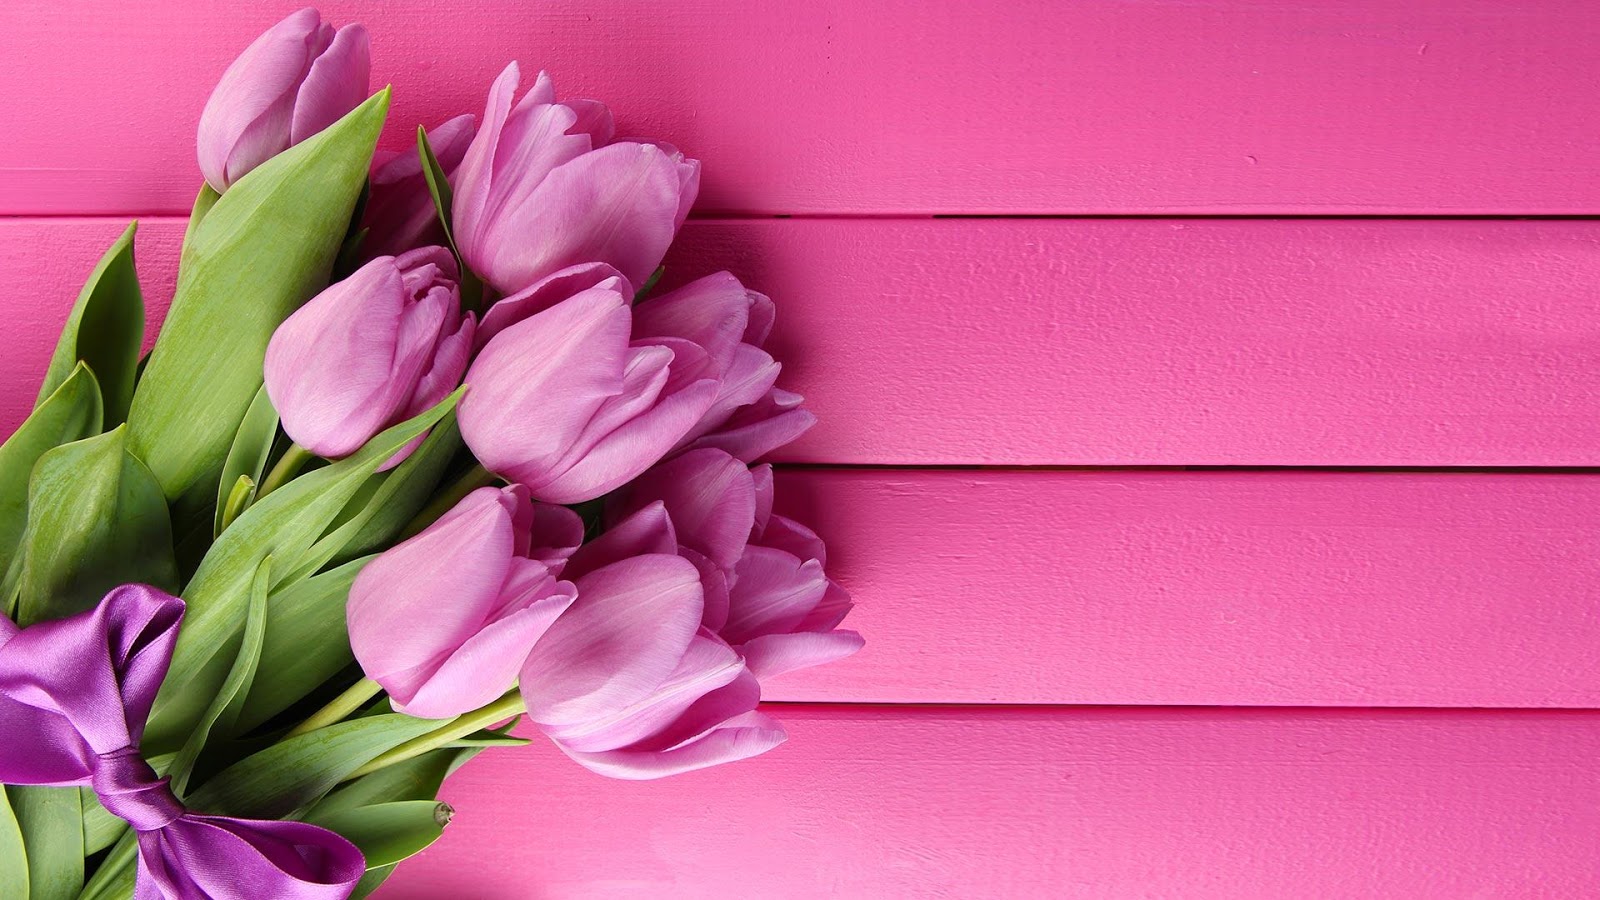 Pink Tulips Live Wallpaper Android Apps On Google Play